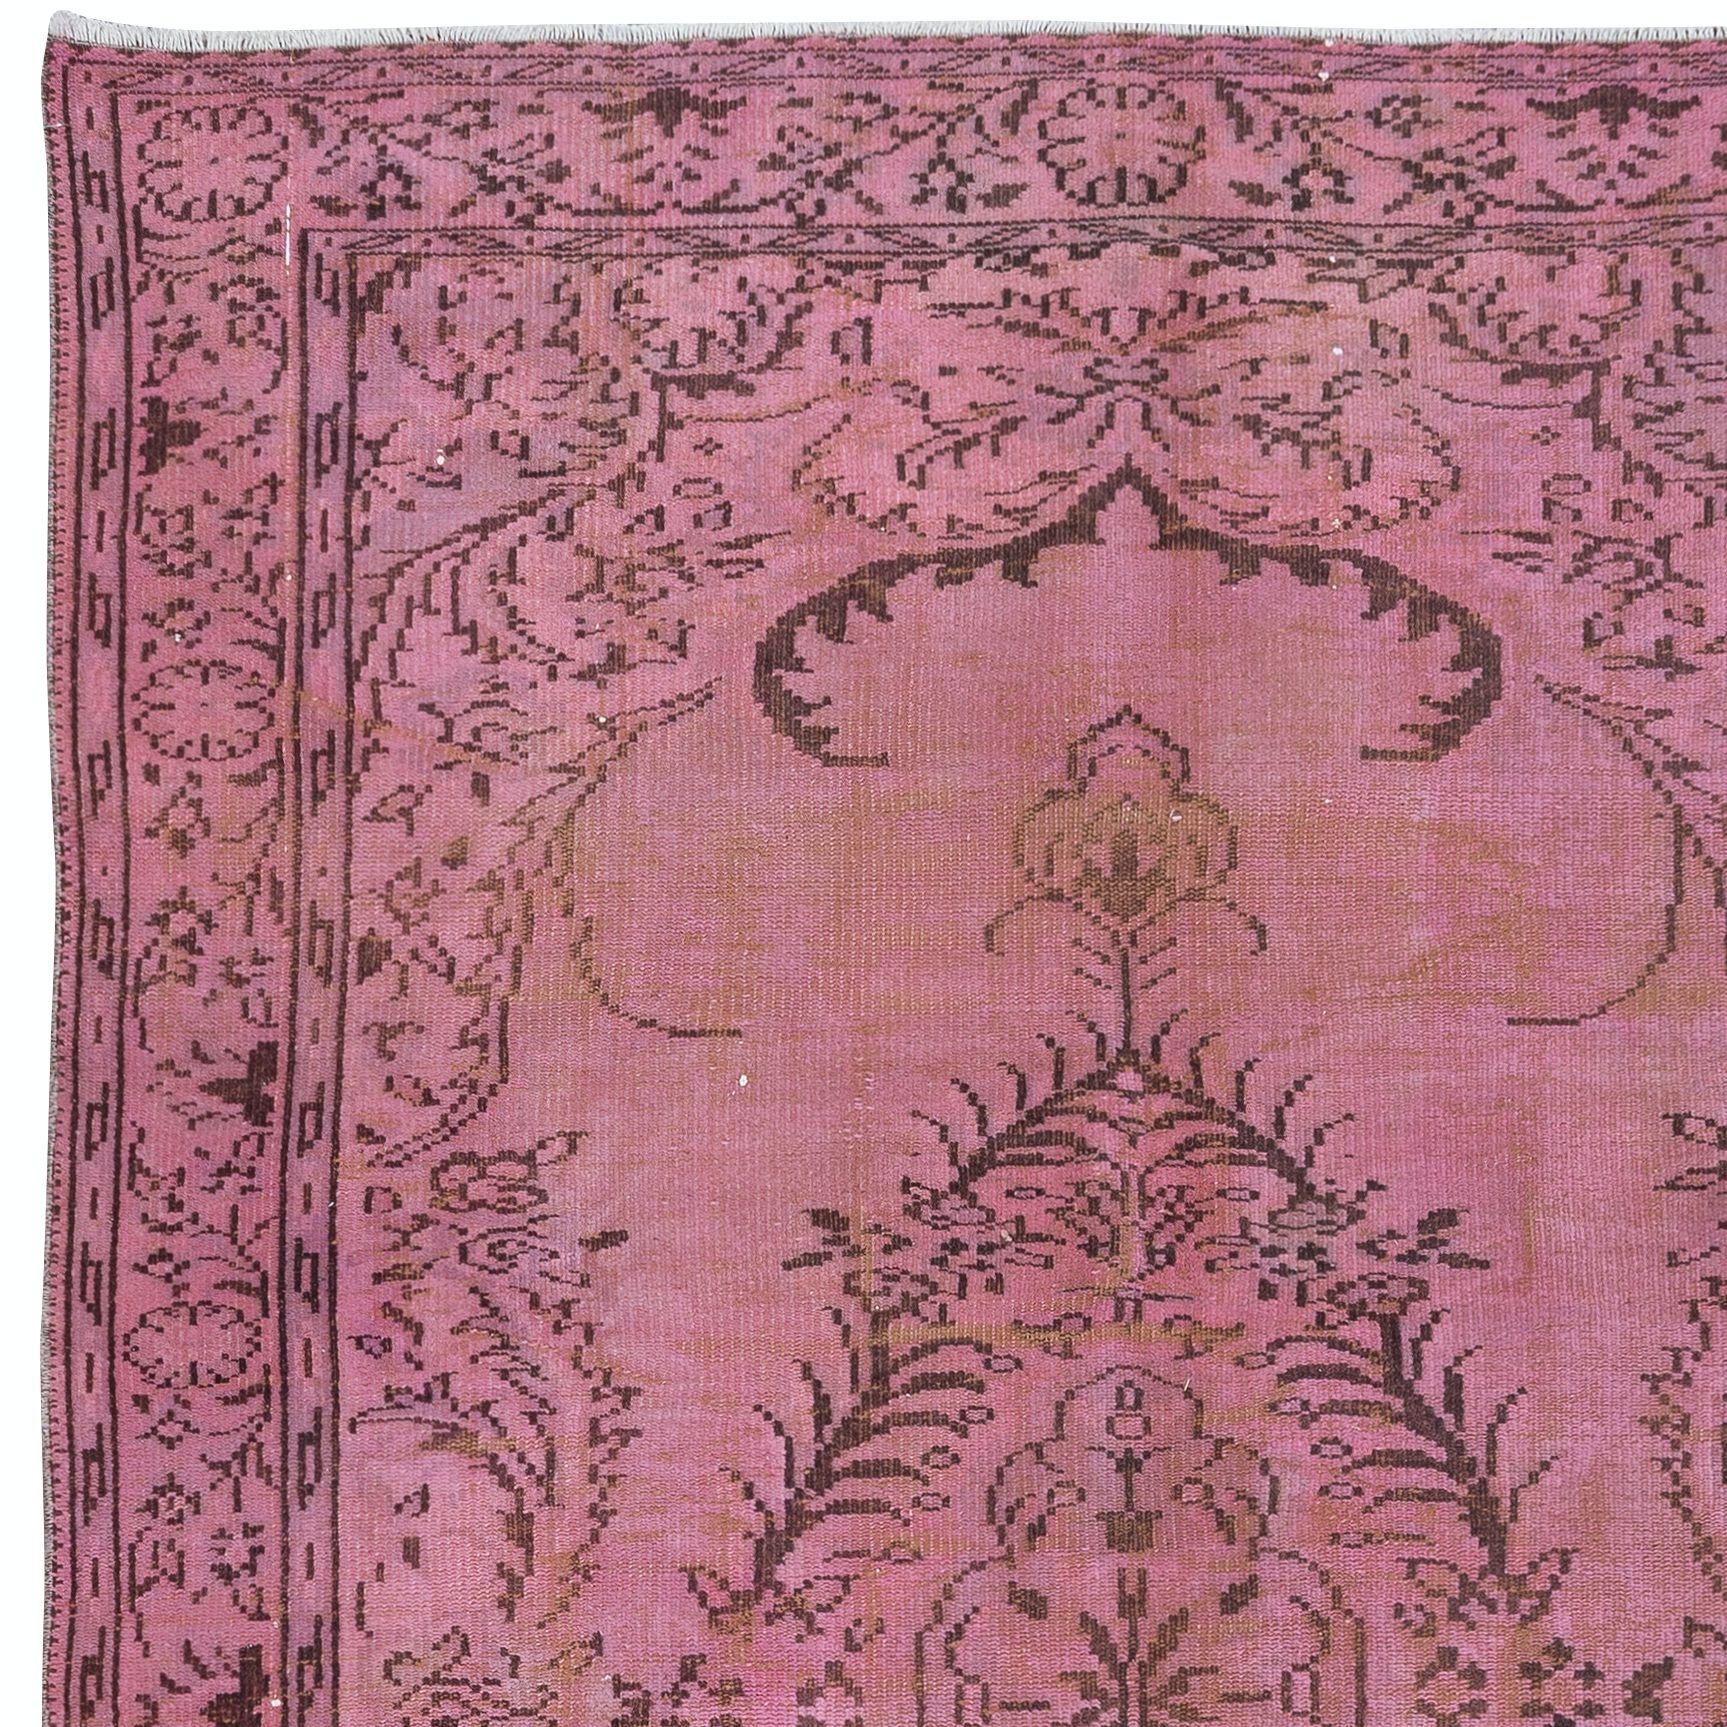 Hand-Knotted 6x9.3 Ft Pink Over-Dyed Handmade Turkish Area Rug for Modern Home & Office Decor